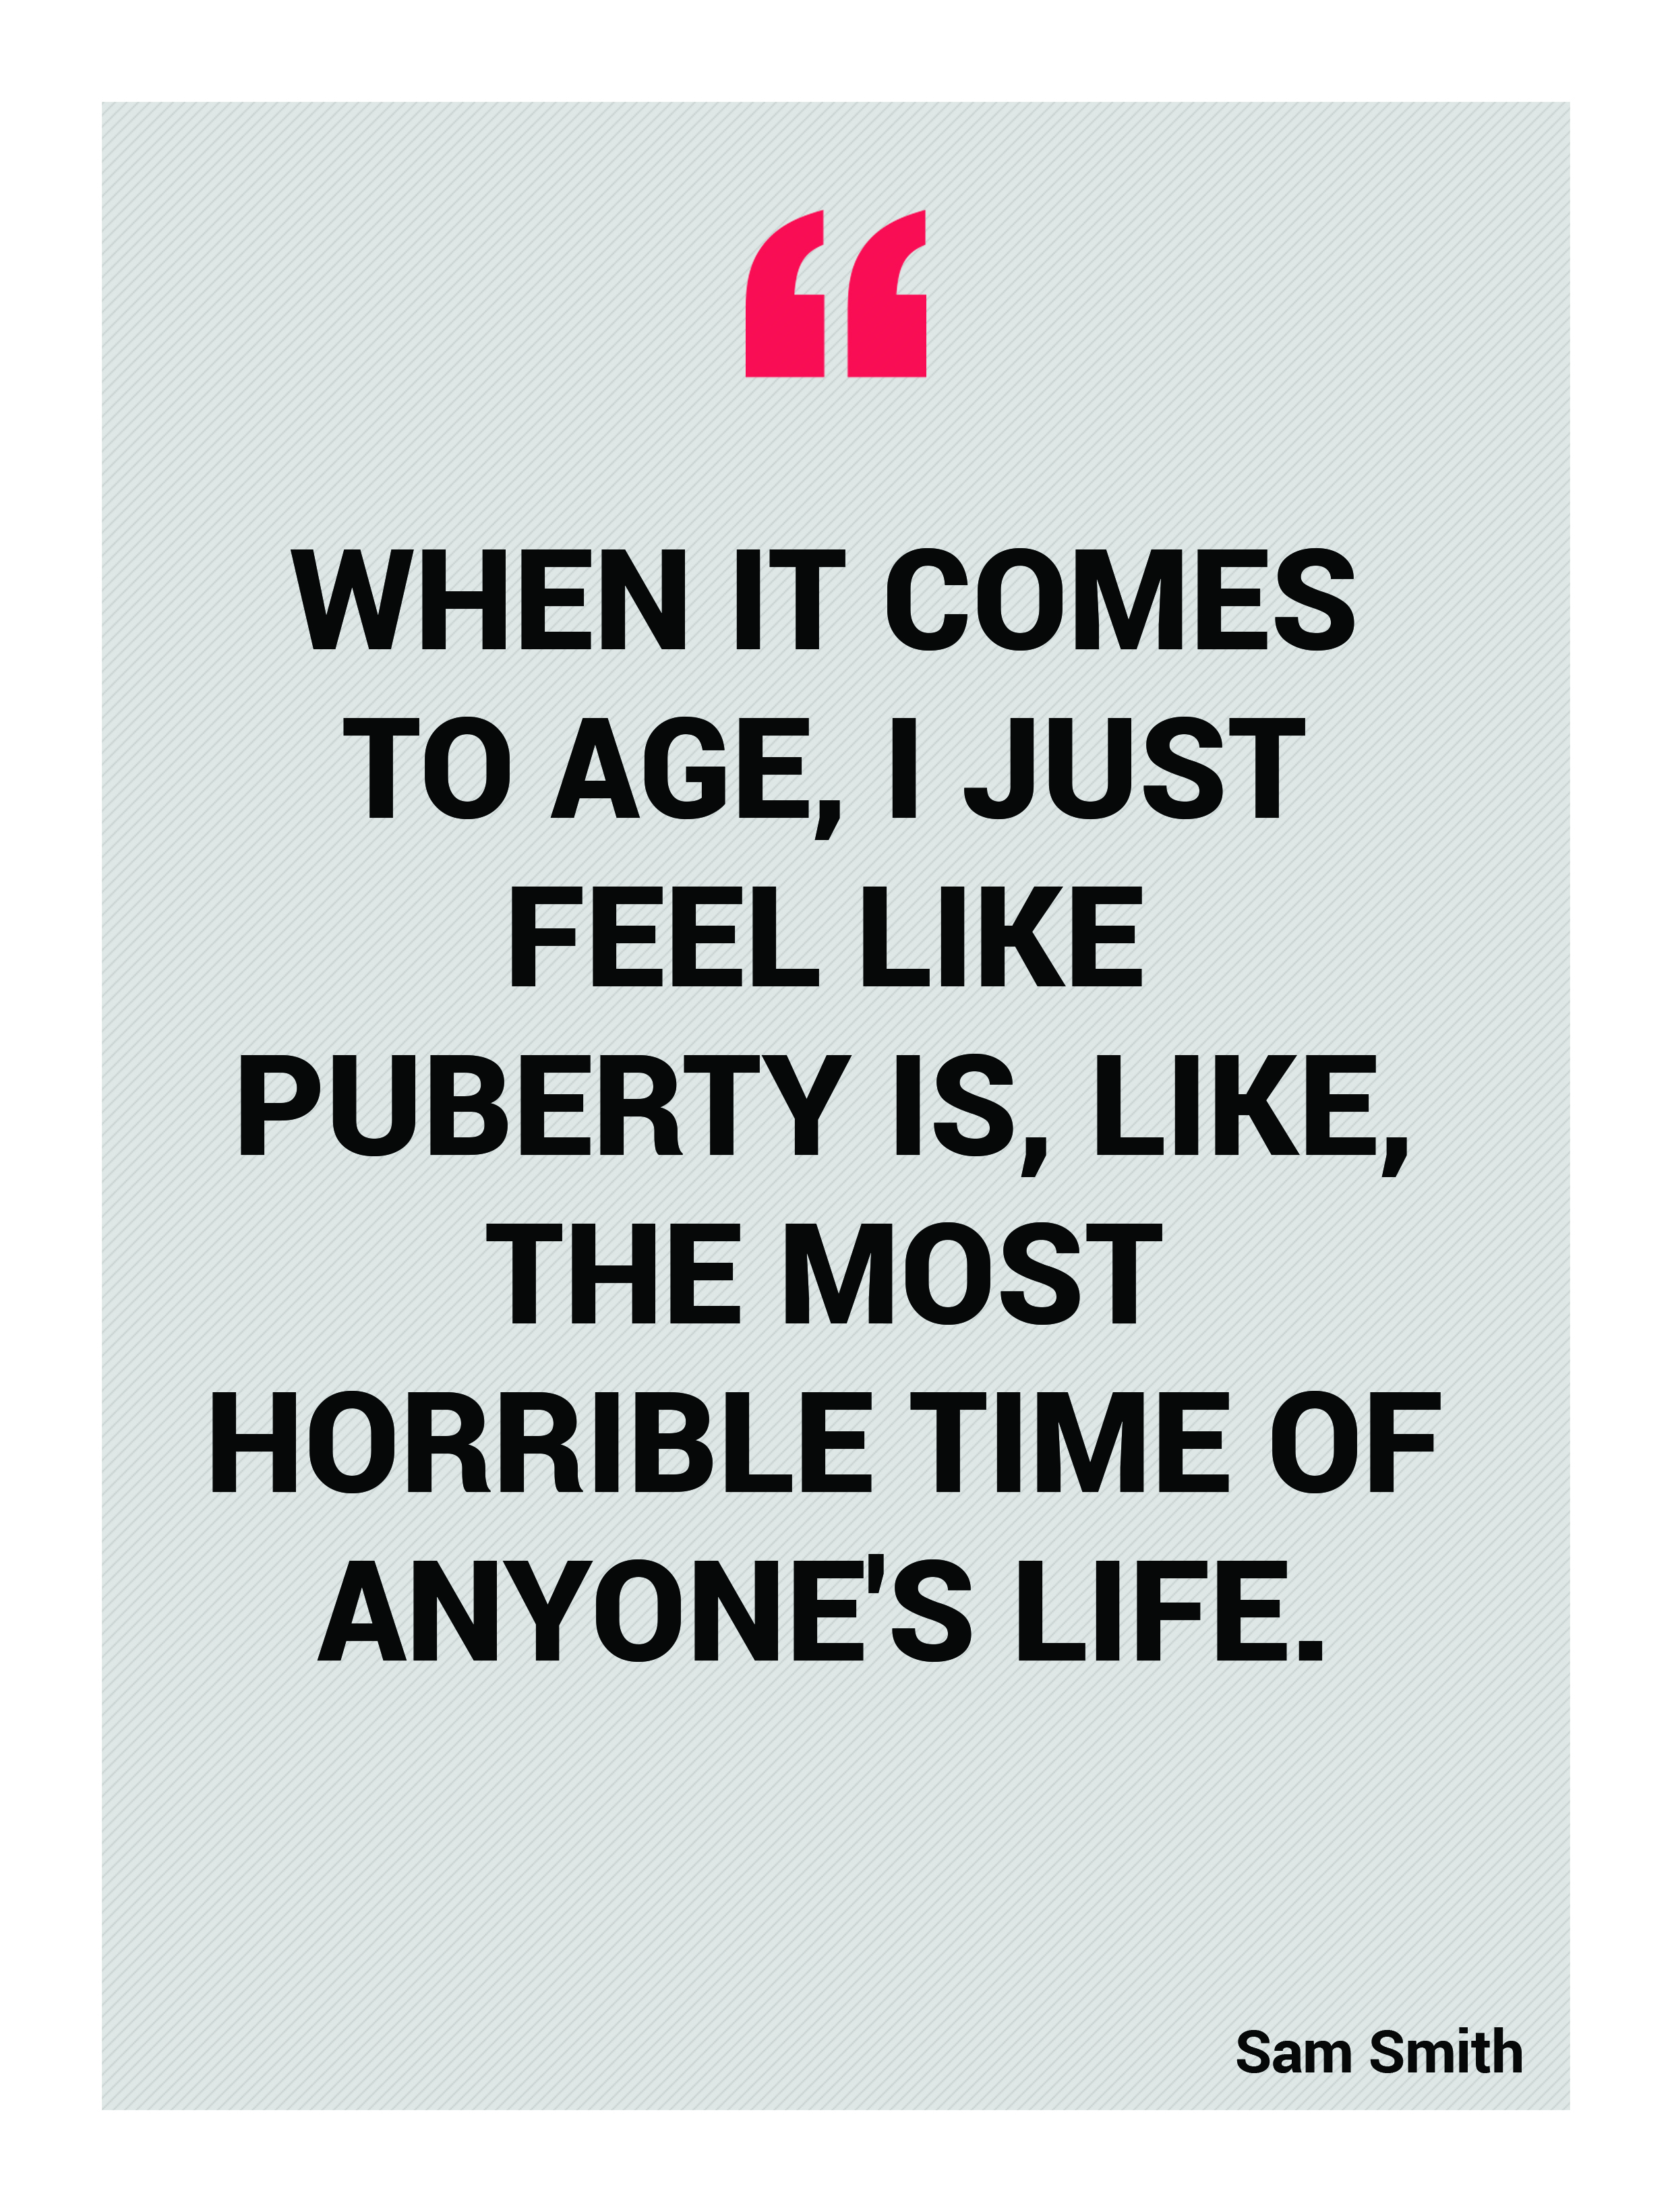 When it comes to age, I just feel like puberty is, like, the most horrible time of anyone's life. Sam Smith